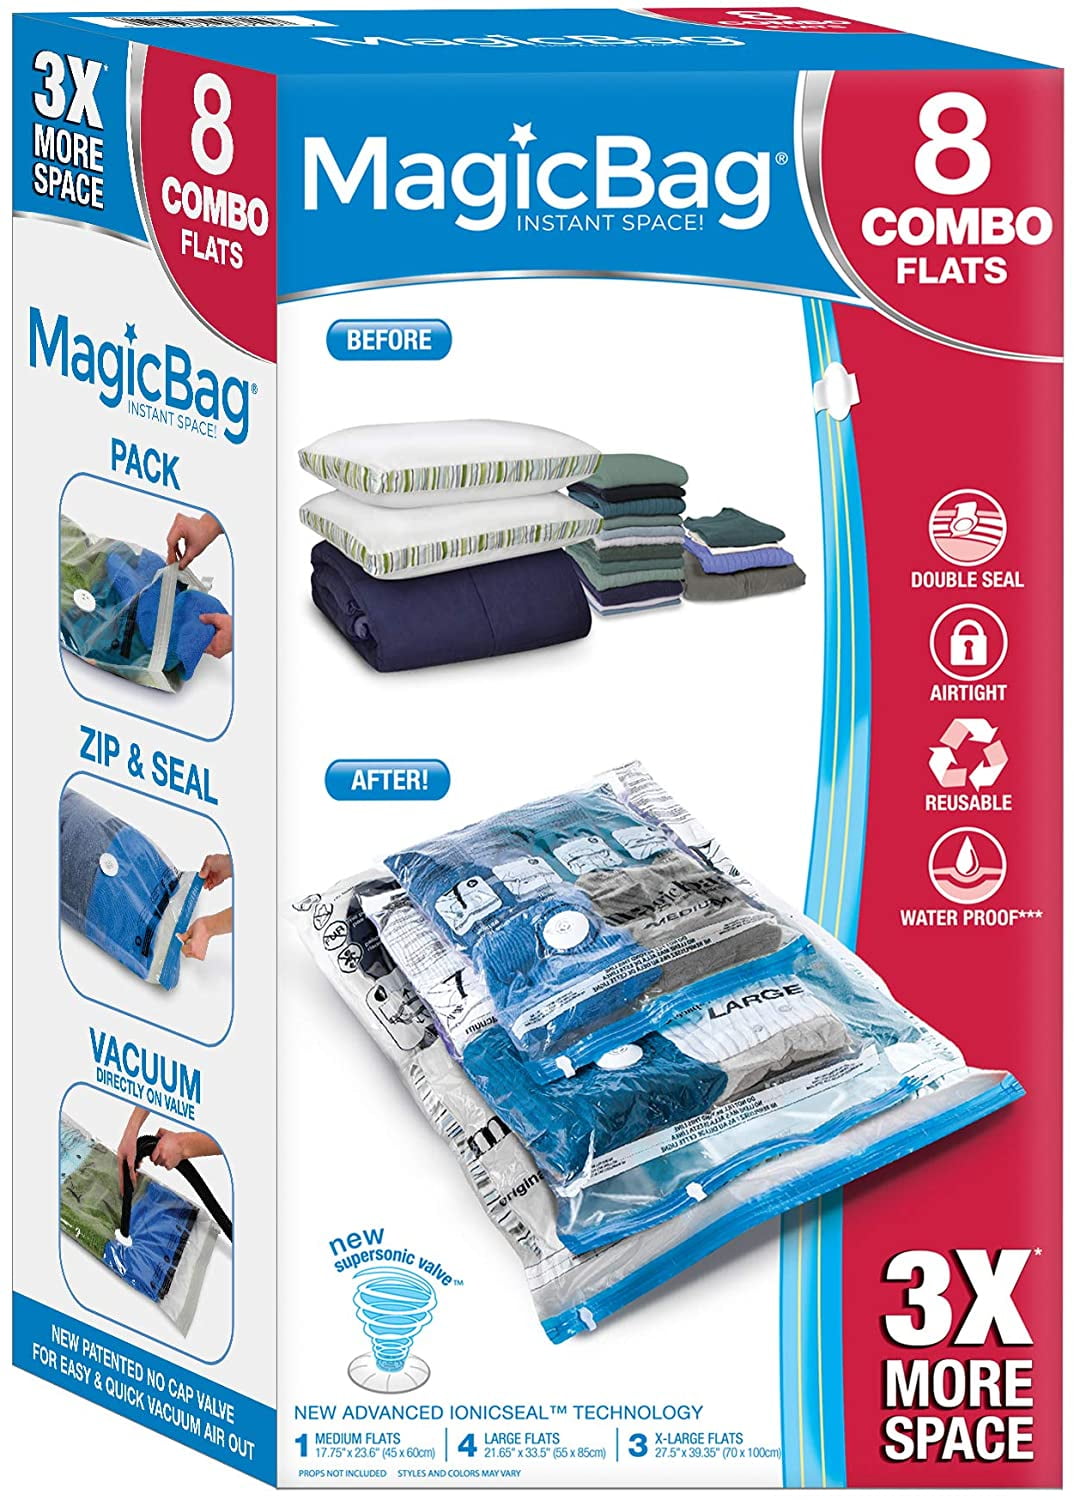 Magicbag Smart Design Instant Space Saver Storage - Combo Set of 15 Bags- Vacuum Seal - Clothing, Bedroom Sets- Home Organization, 5005532-200